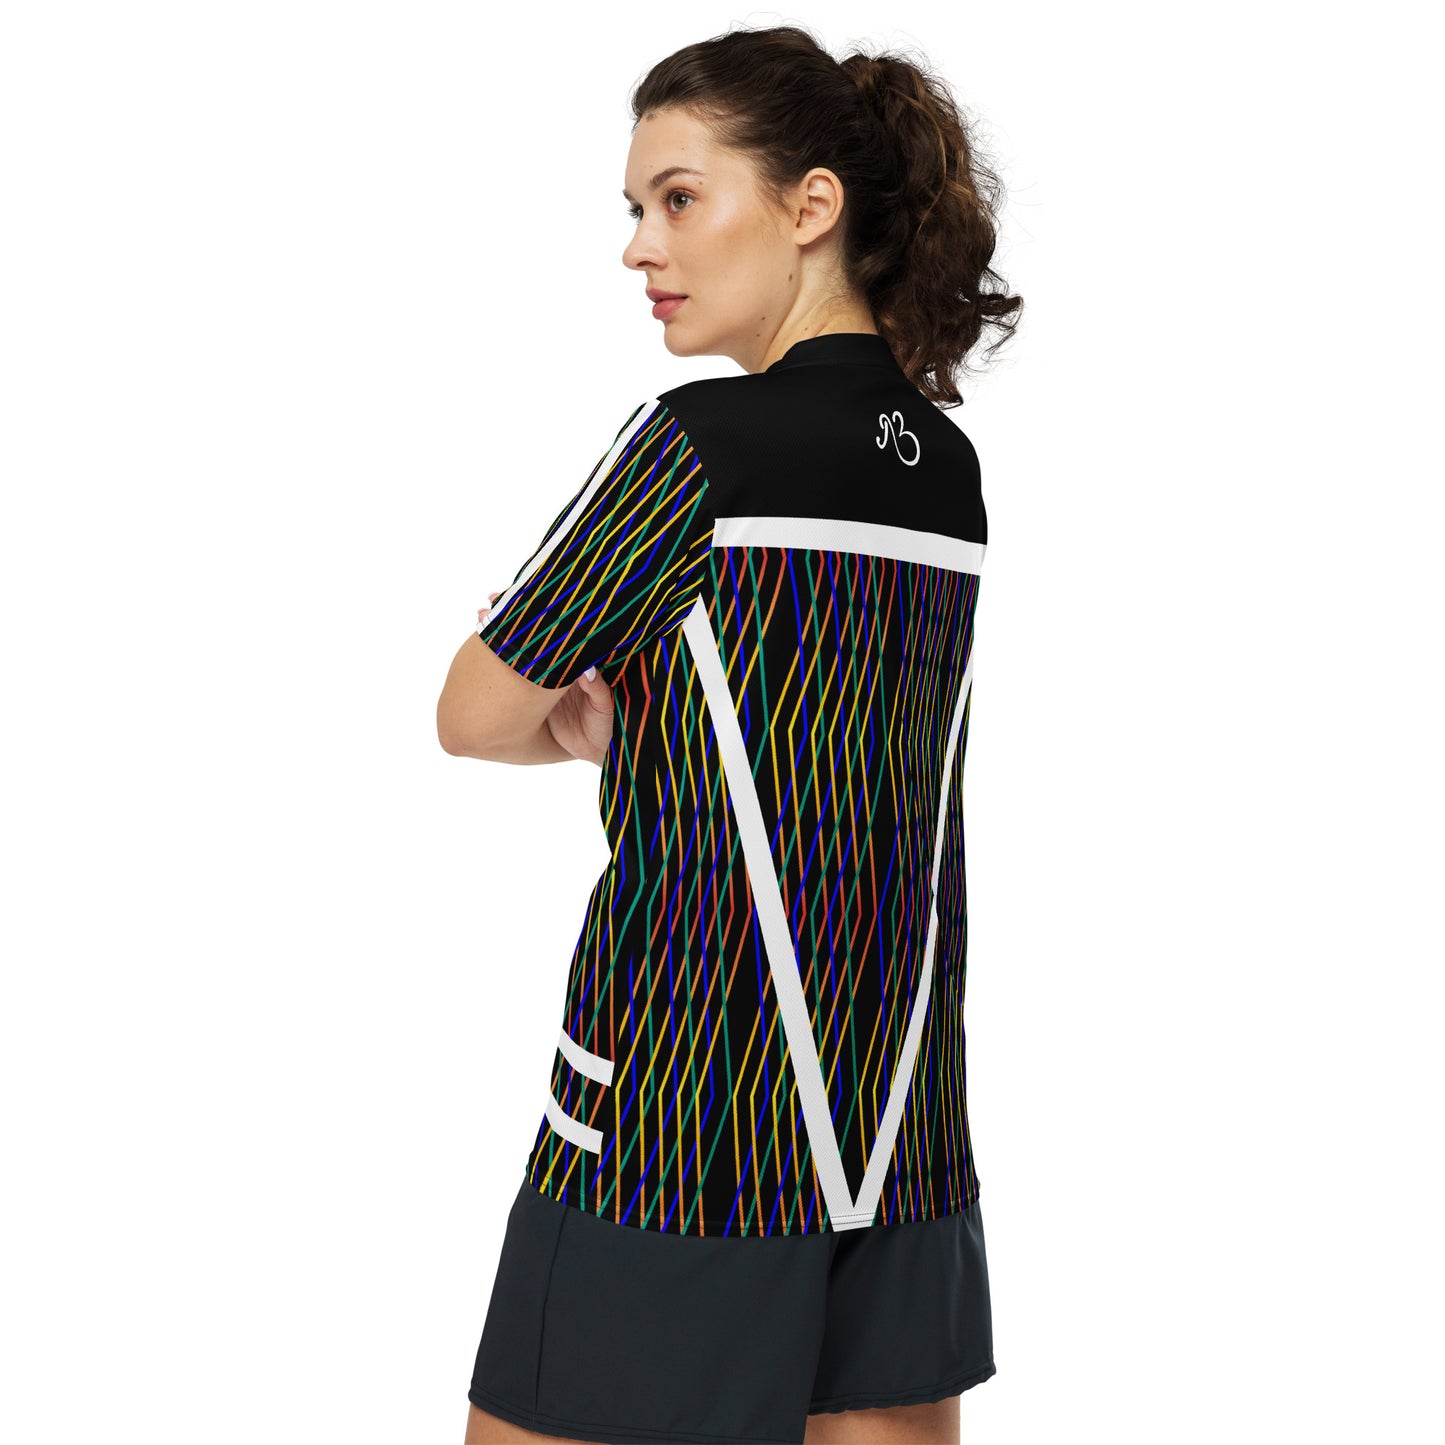 Constellation print recycled unisex sports jersey